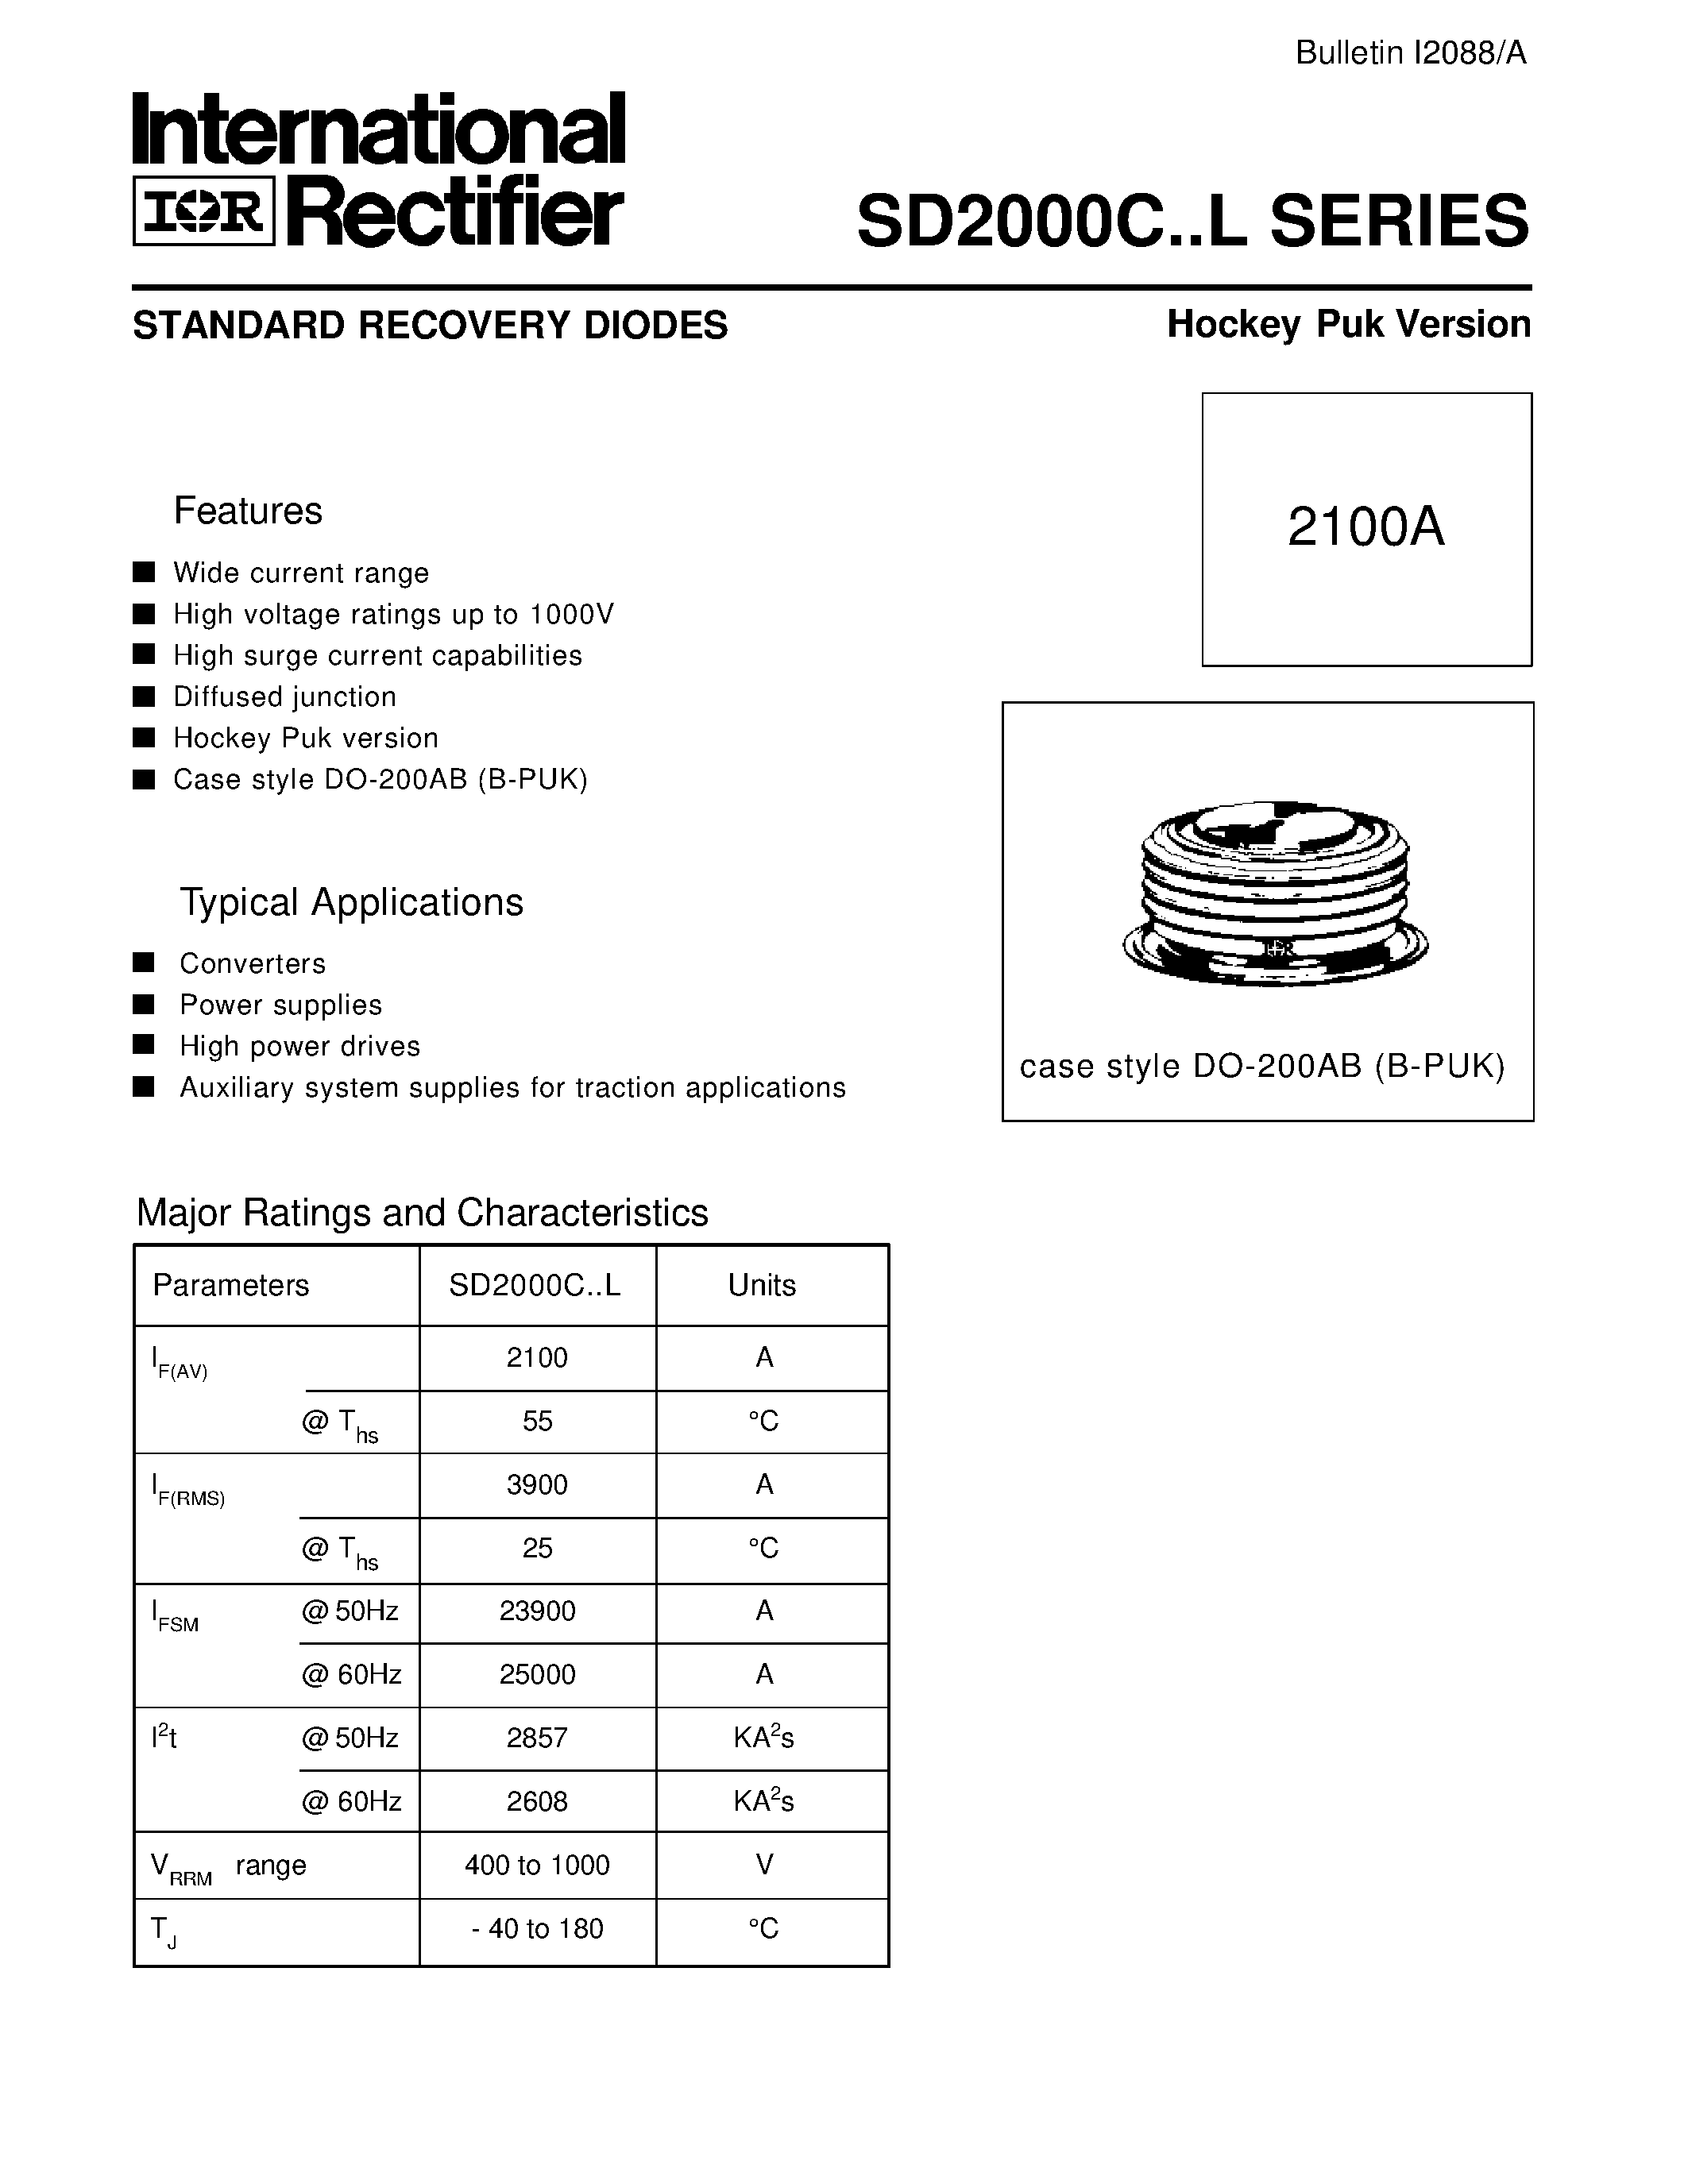 Даташит SD2000C - STANDARD RECOVERY DIODES Hockey Puk Version страница 1